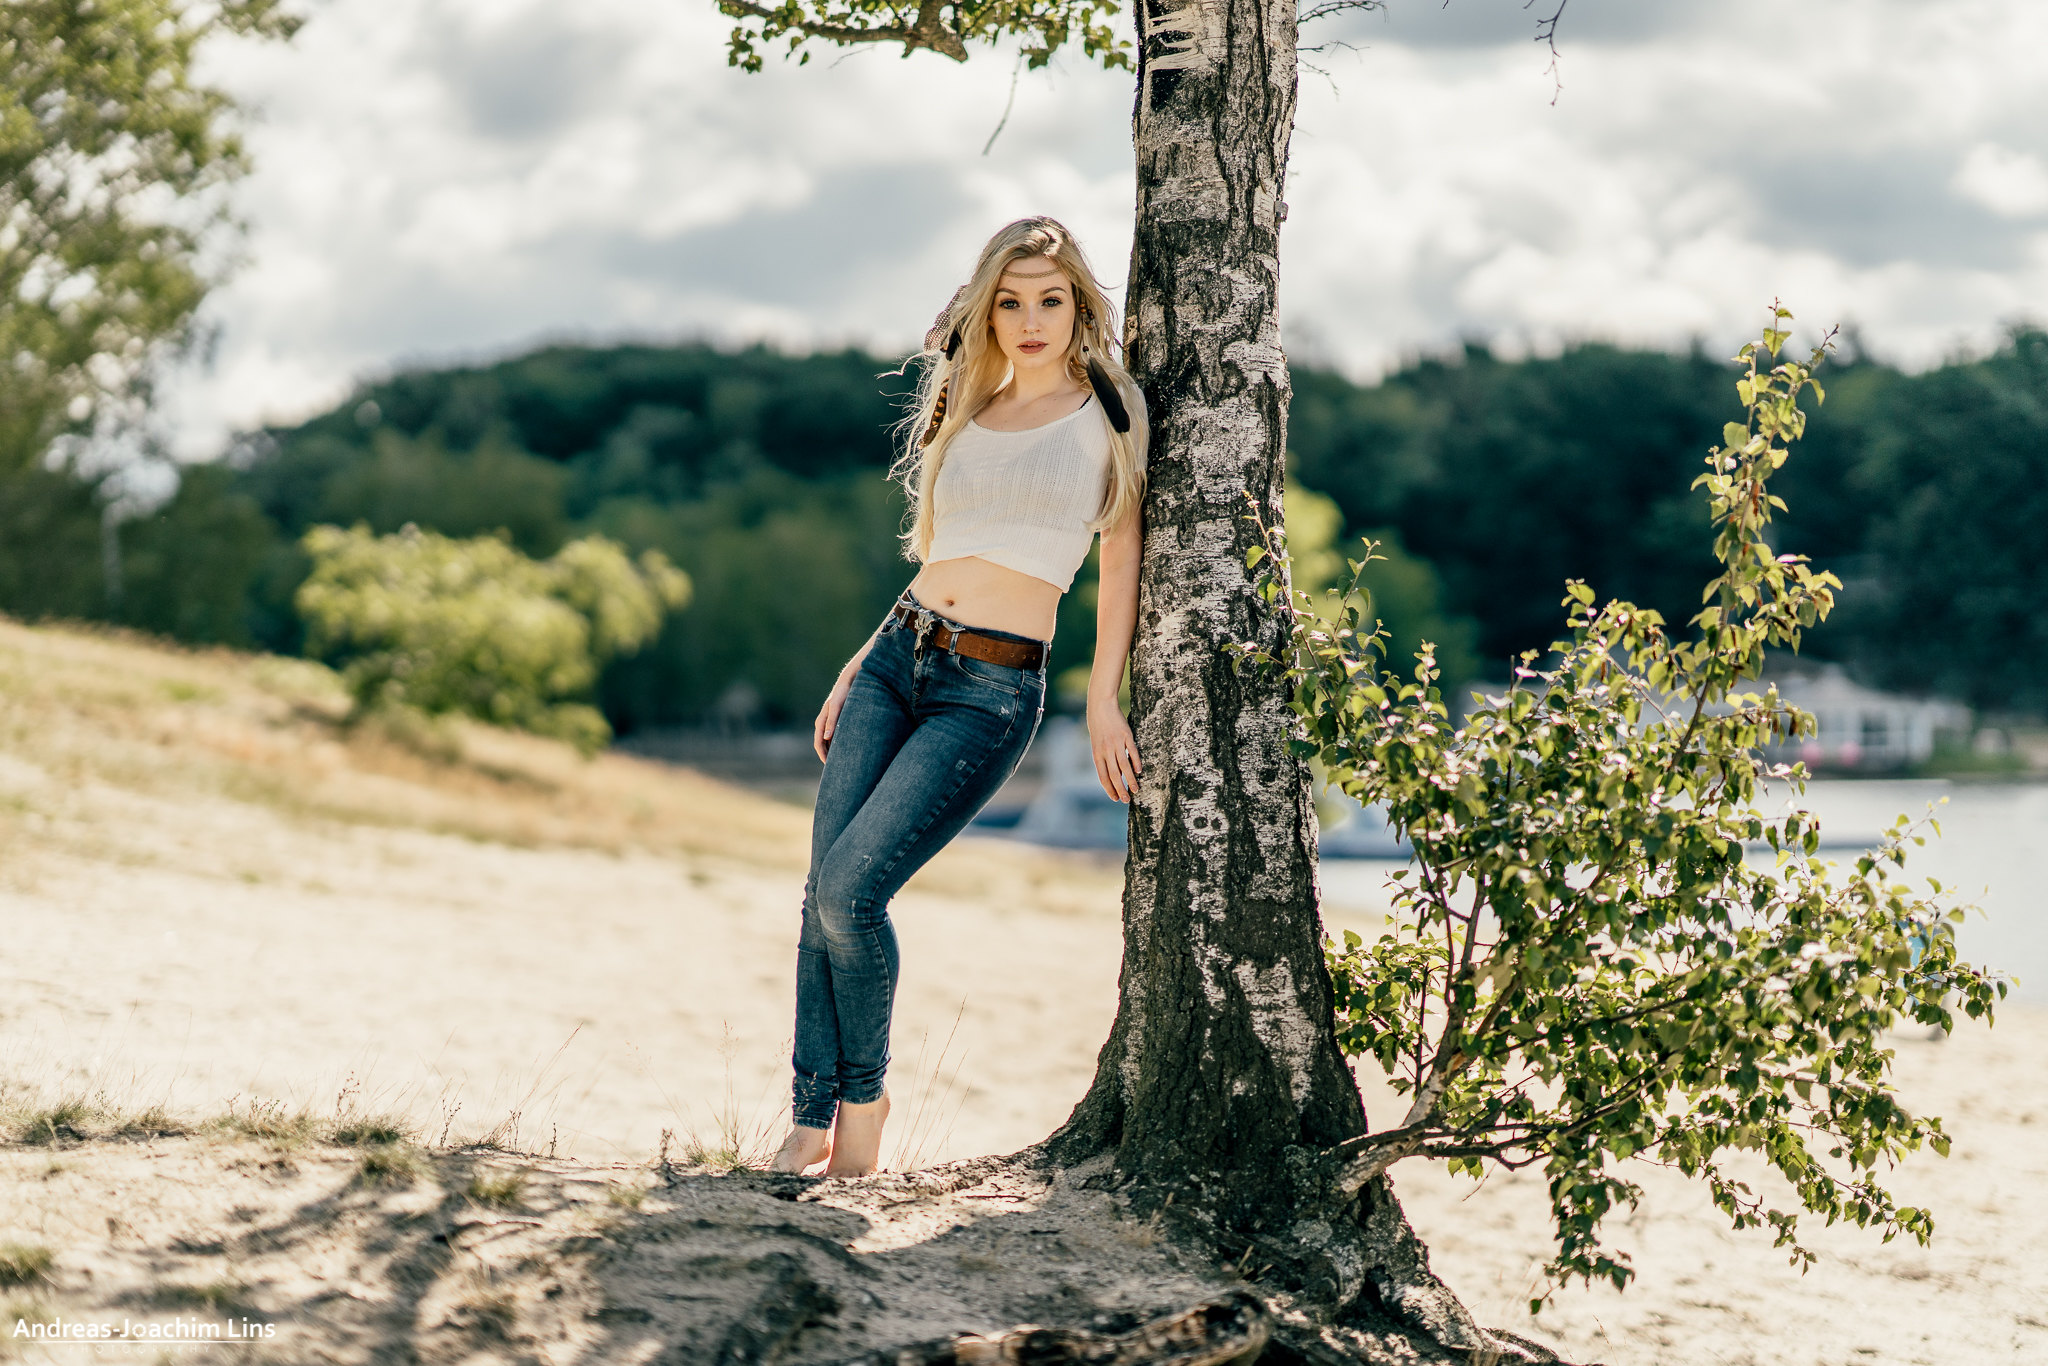 Women Model Blonde Loba Looking At Viewer Parted Lips Feathers White Tops Belt Jeans Barefoot Trees  2048x1366